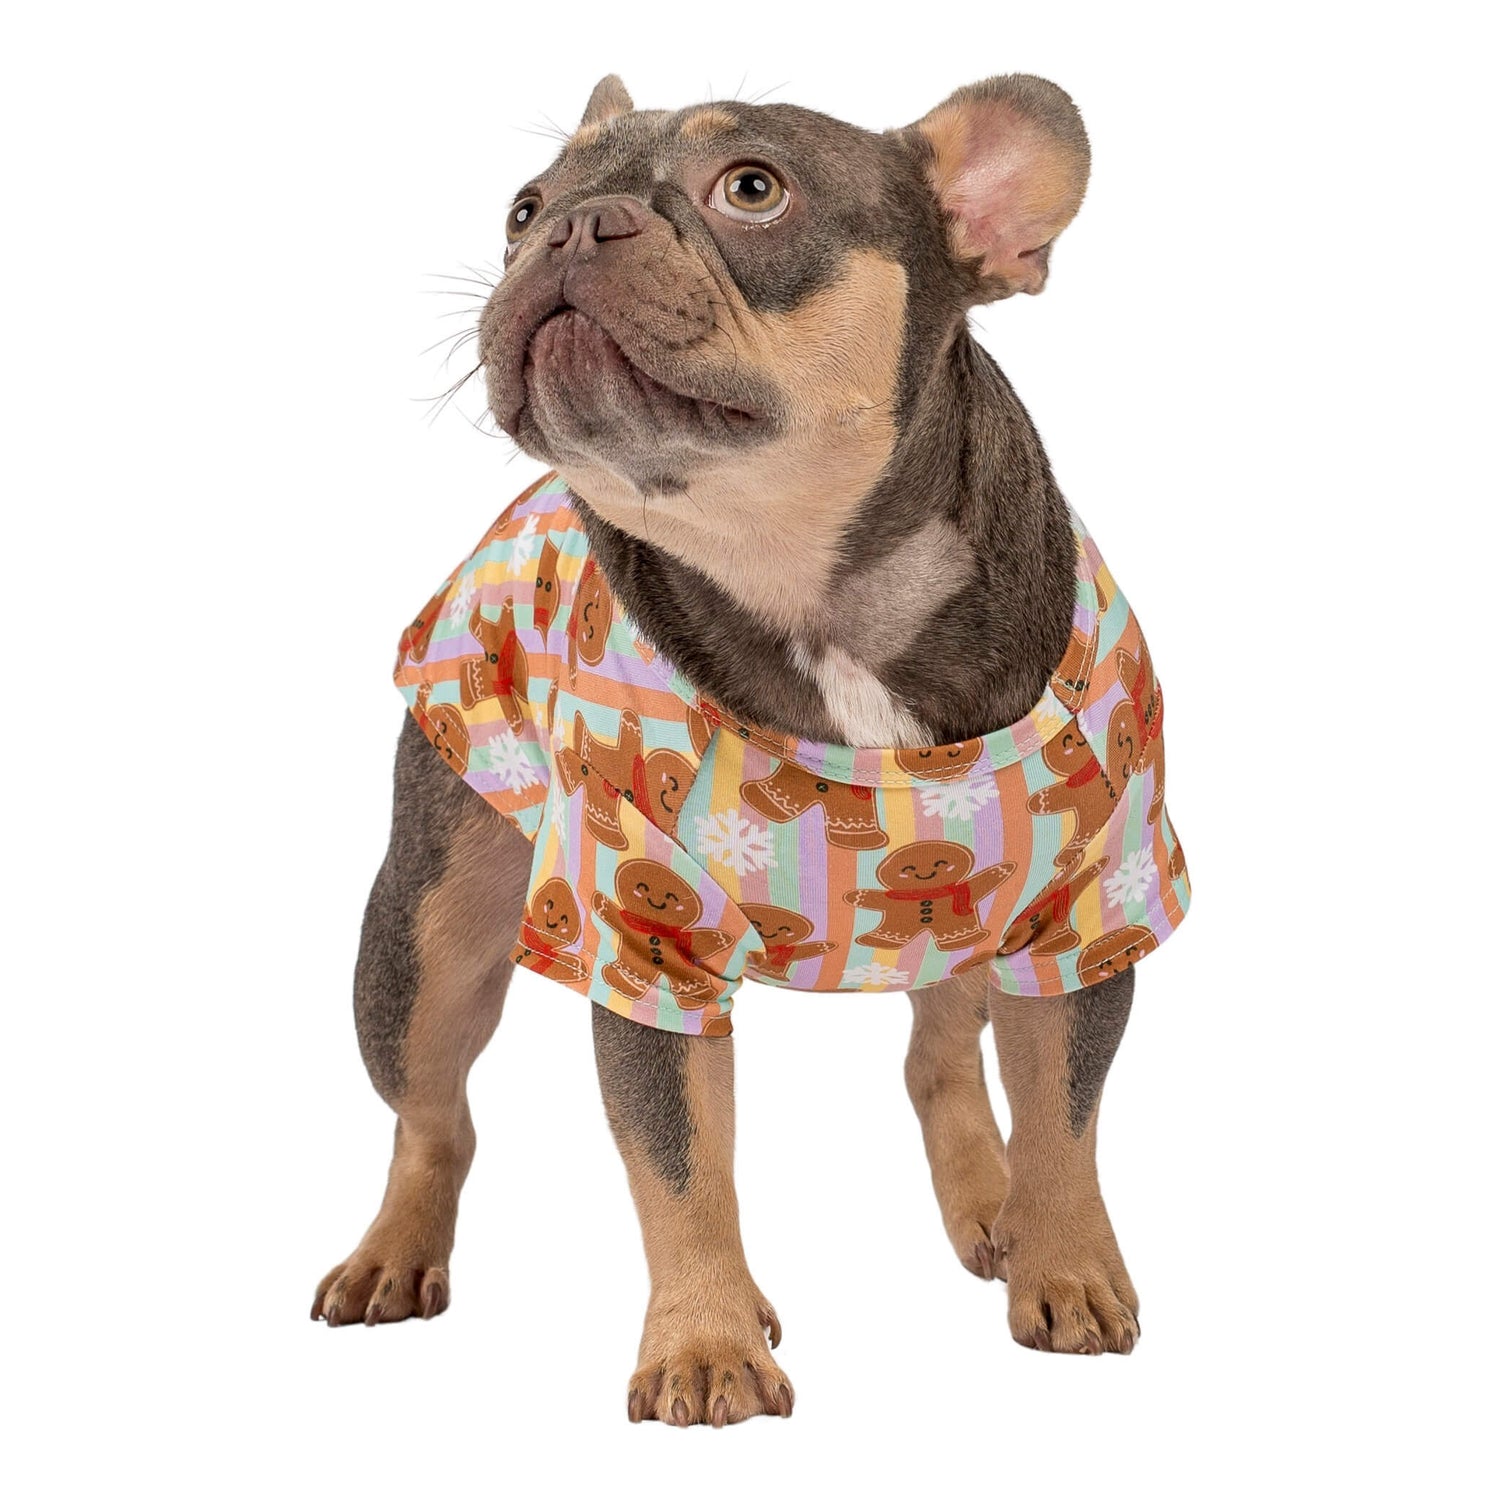 Wednesday the French Bulldog wearing a Vibrant Hound Gingerbread Cheer shirt for dogs. It has vertical rainbow stripes with Christmas GIngerbread pritned on the shirt.